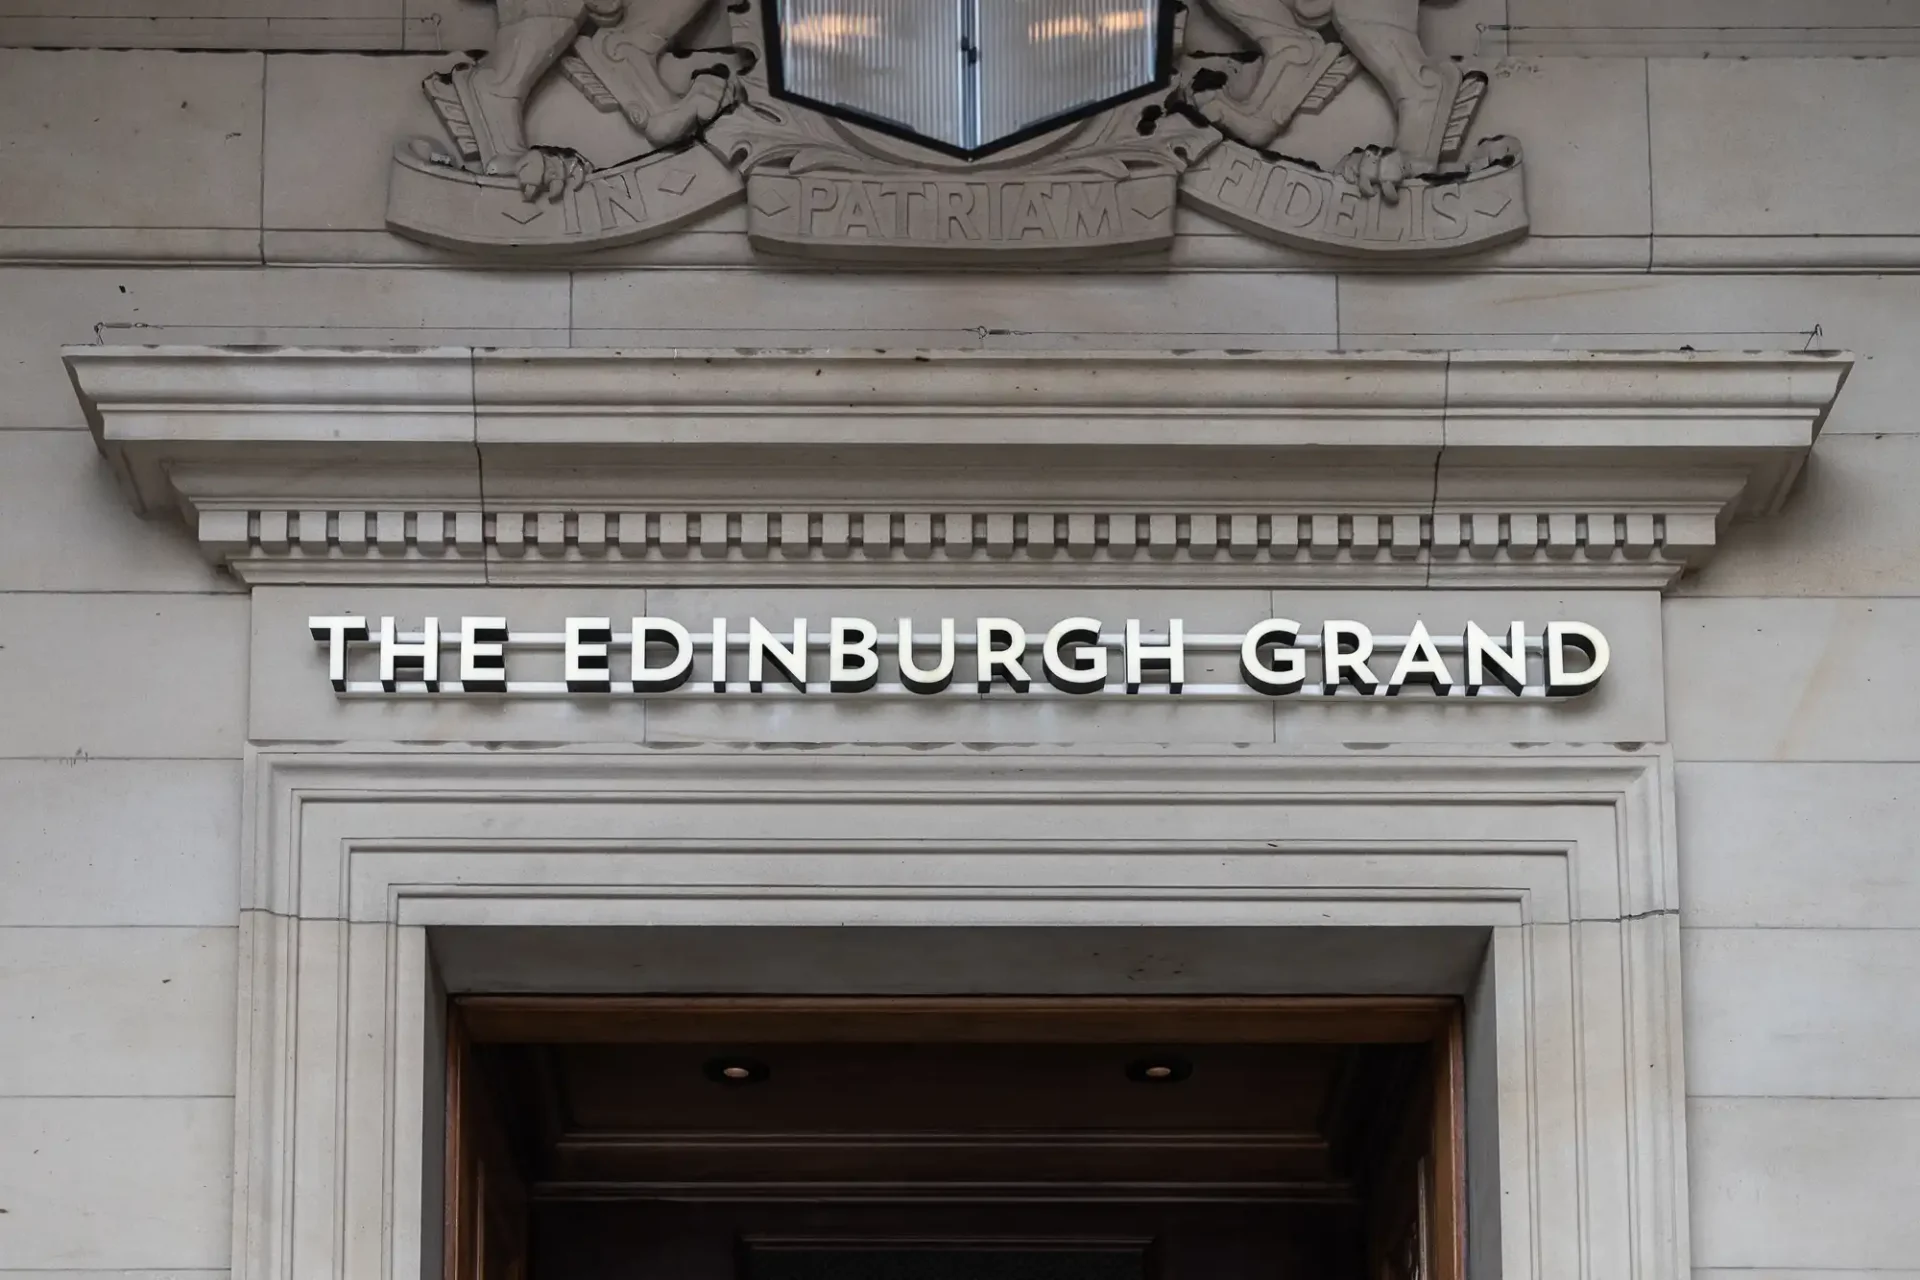 Entrance of the edinburgh grand with a prominent name sign displayed above the doorway, framed by a decorative stone pediment.